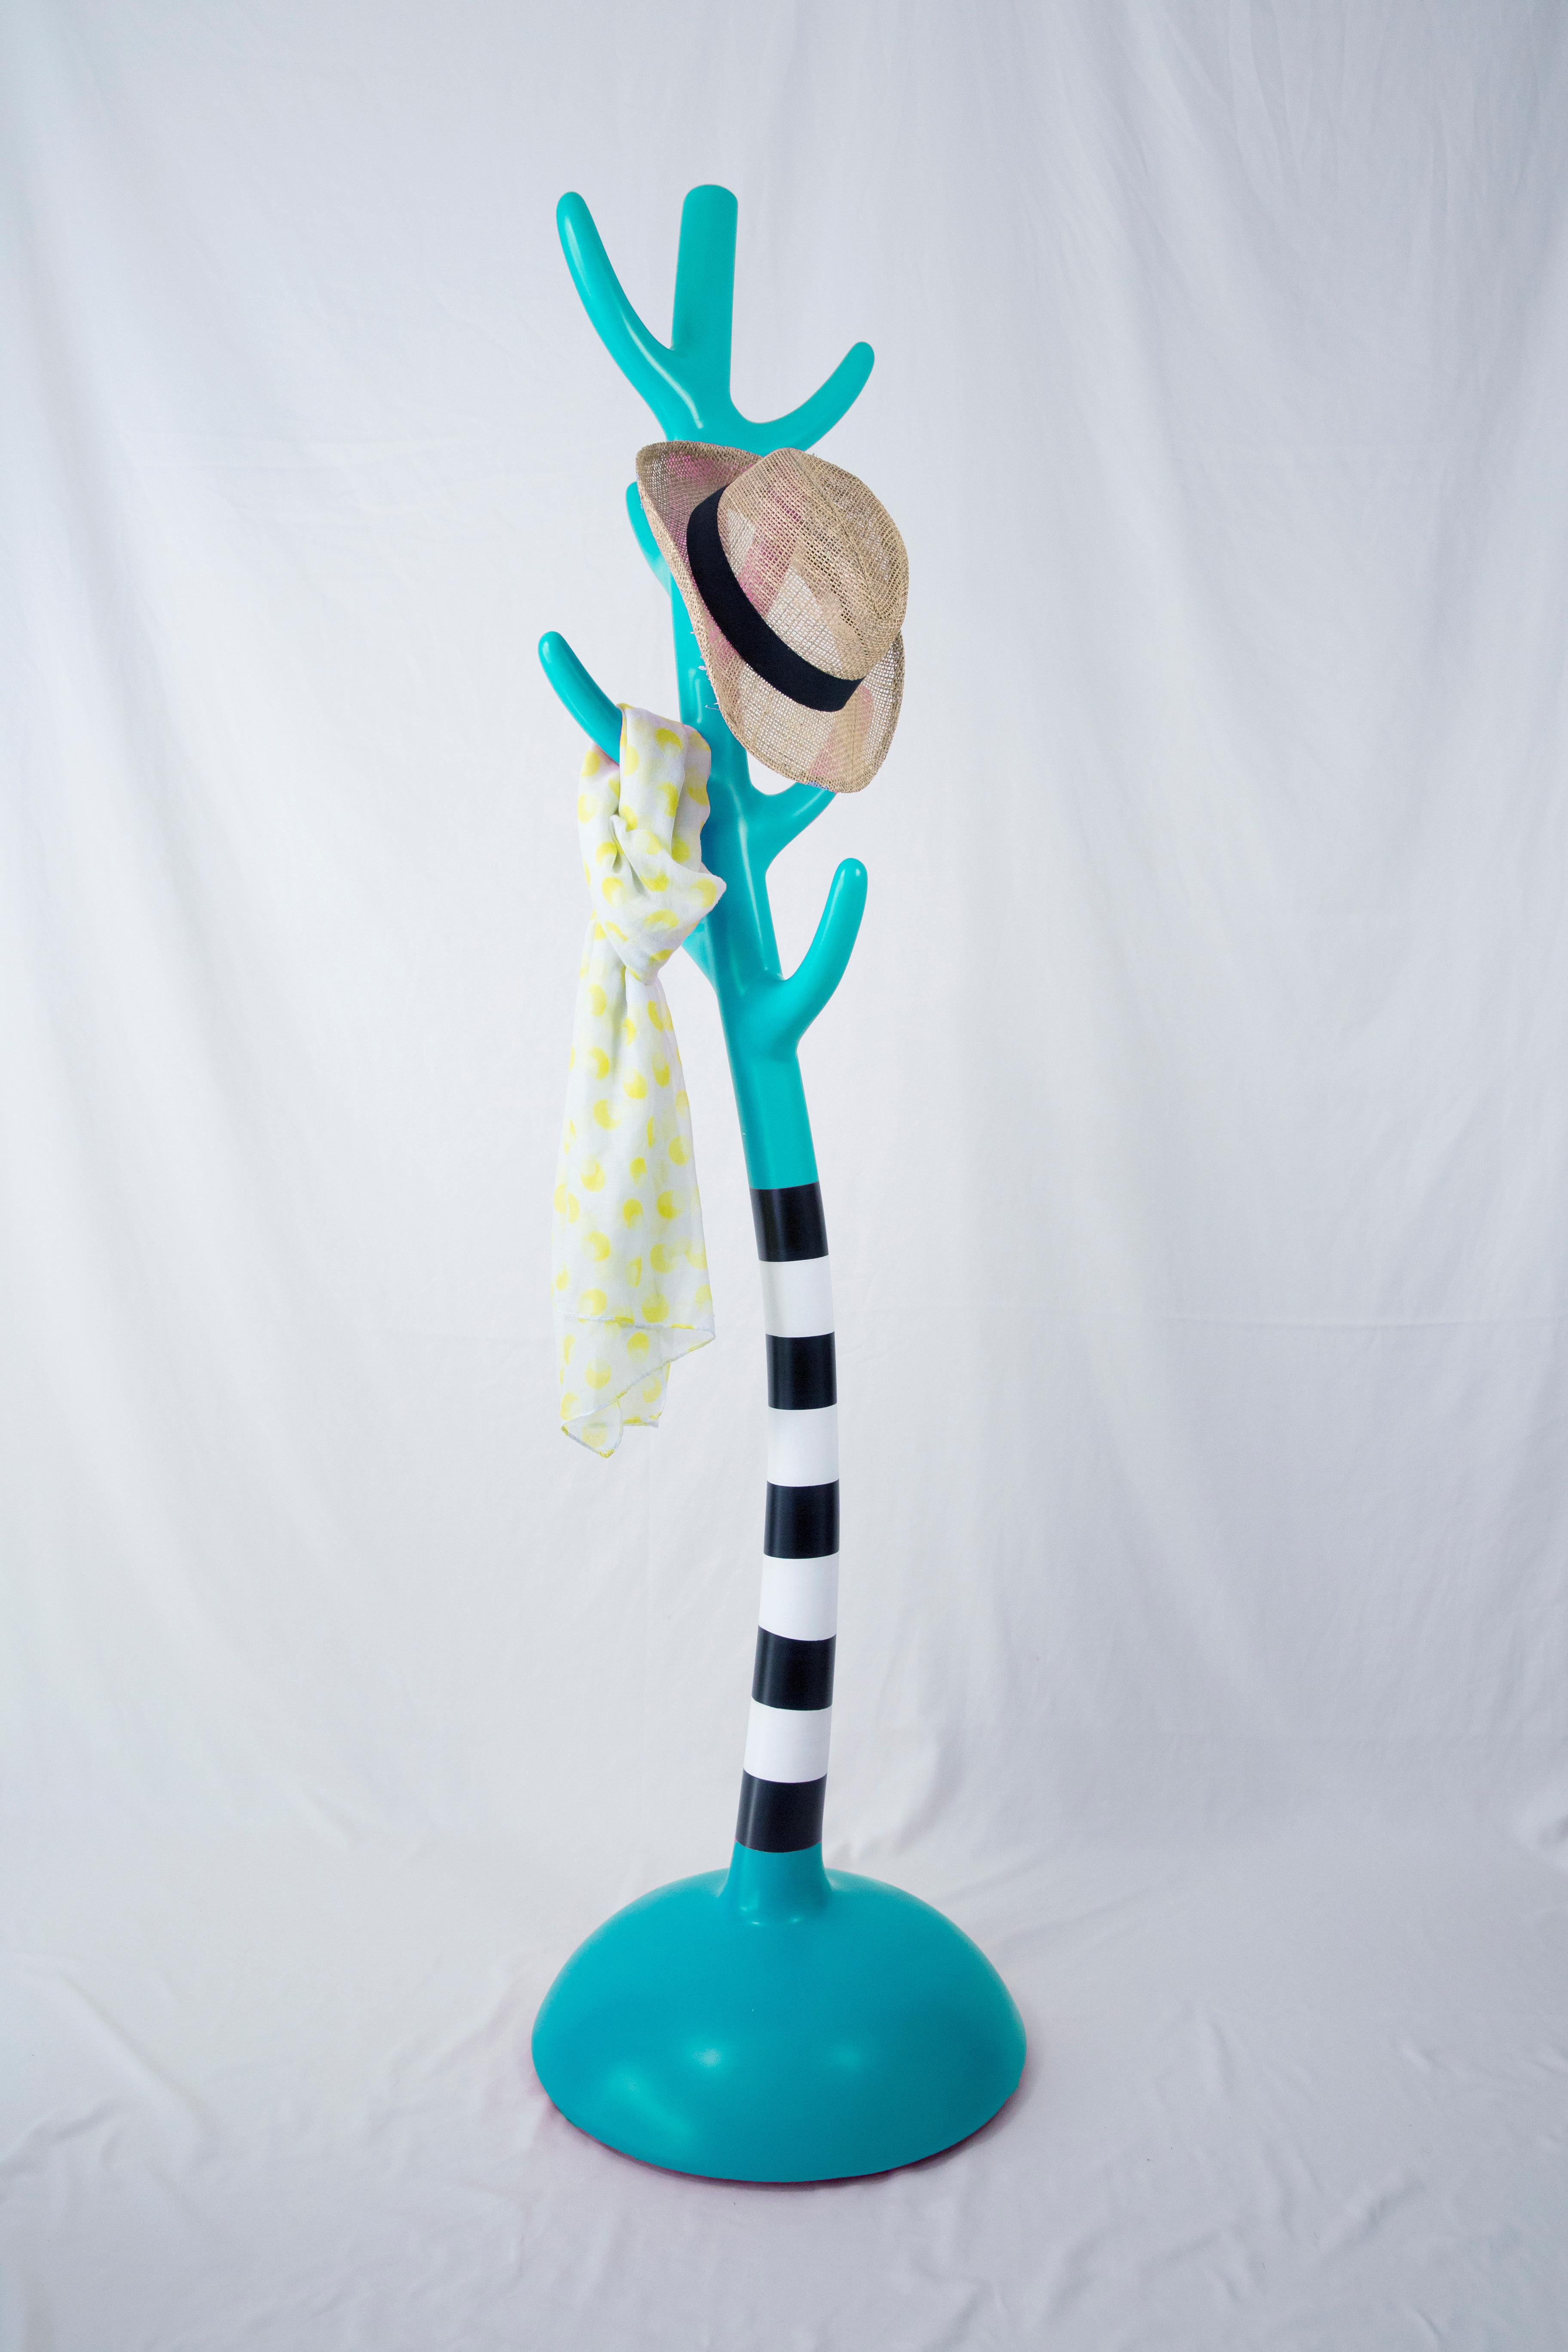 Crooked Coat Rack: Turquoise Sculptural Artistic Hanger In New Condition For Sale In Istanbul, Maltepe